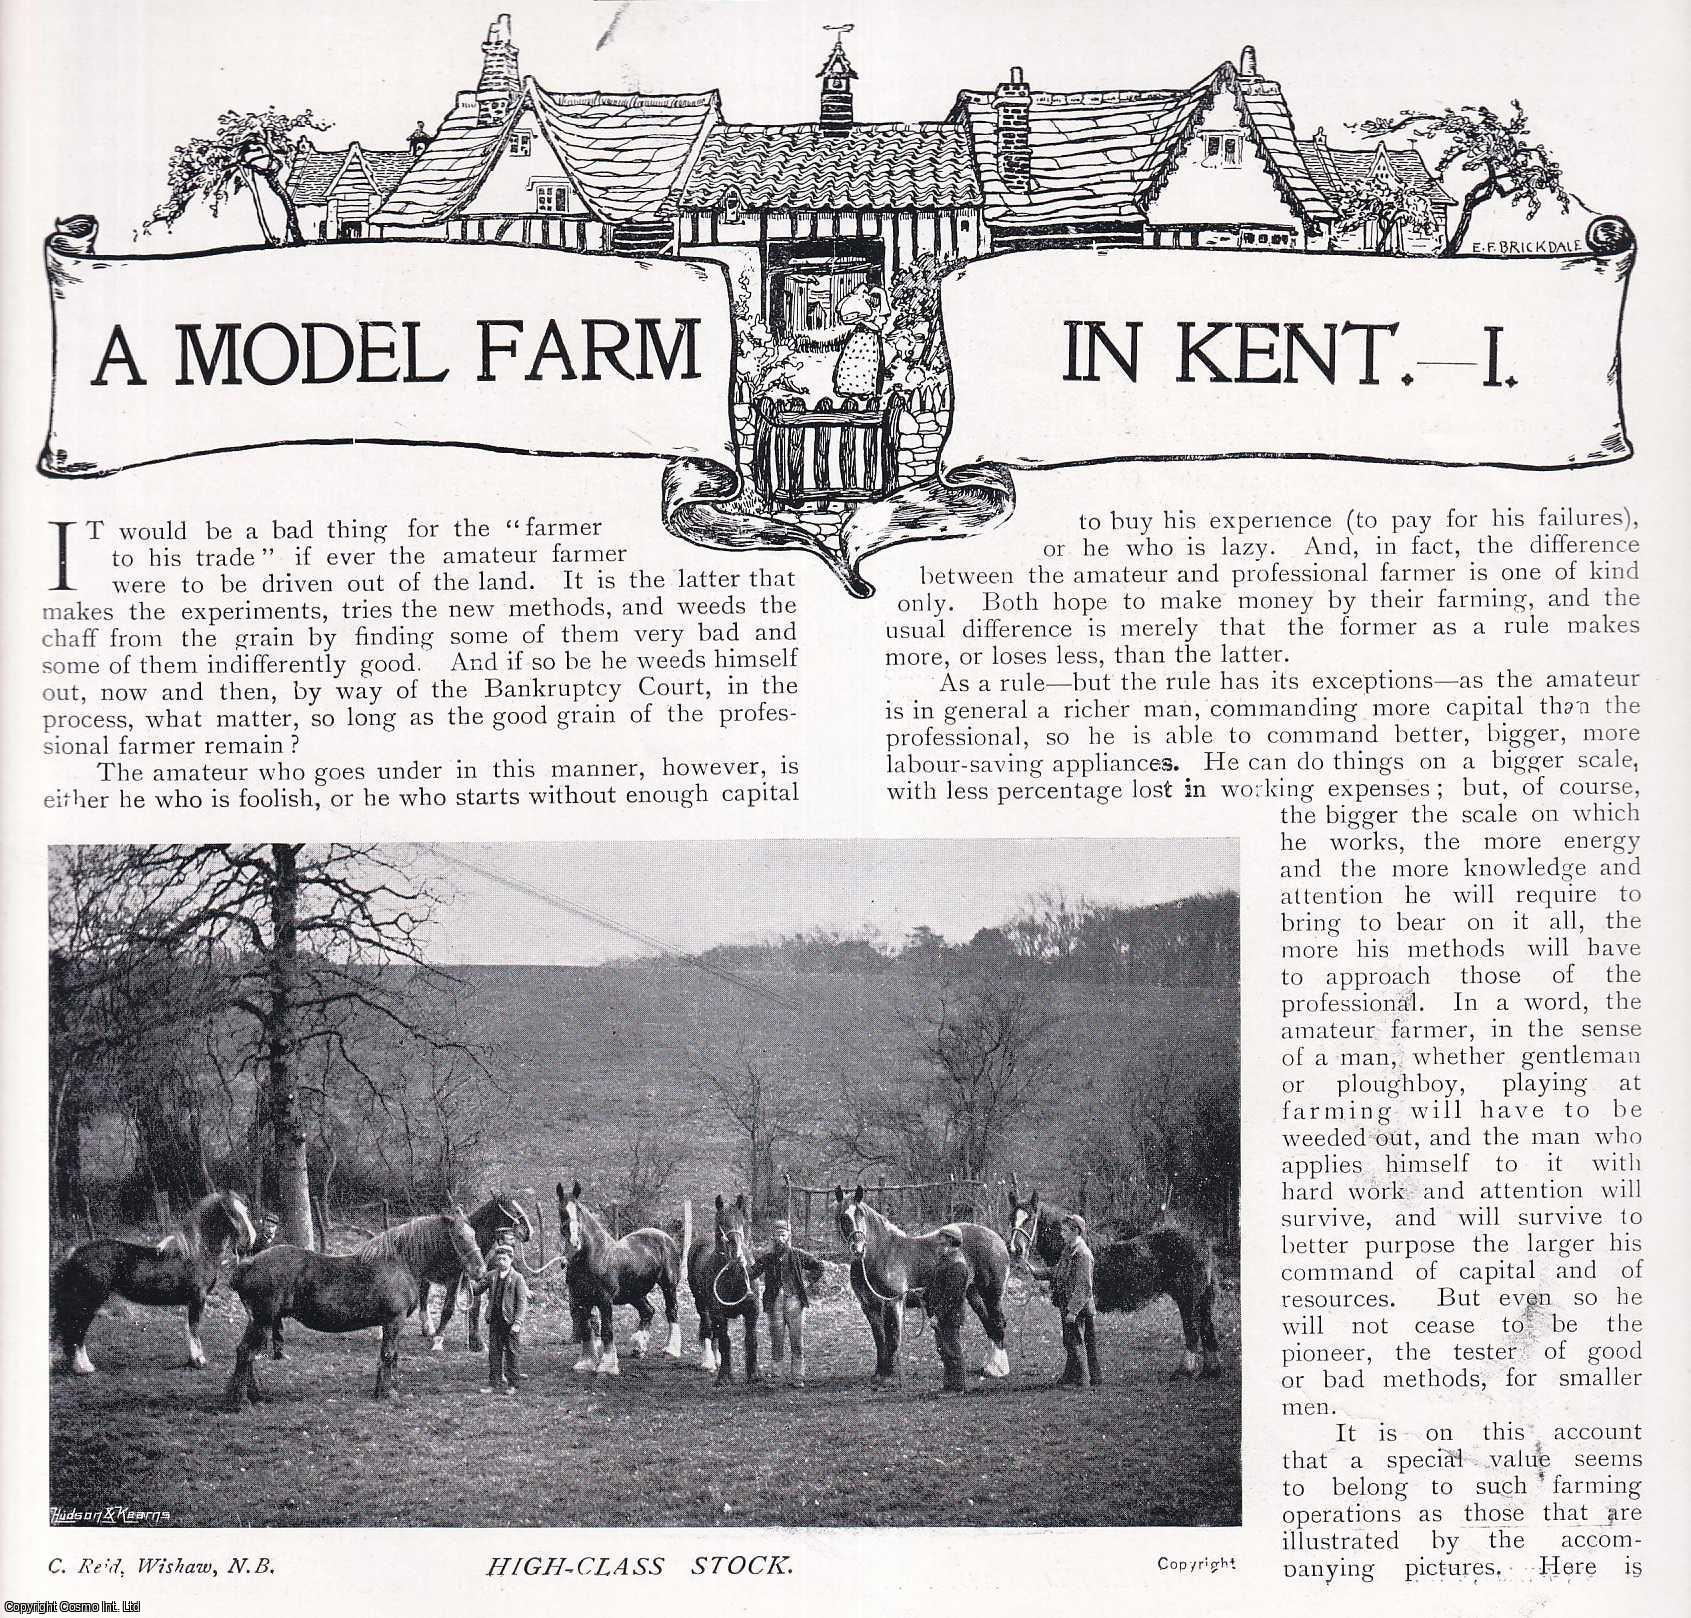 COUNTRY LIFE - A Model Farm in Kent, Part 1. Several pictures and accompanying text, removed from an original issue of Country Life Magazine, 1898.